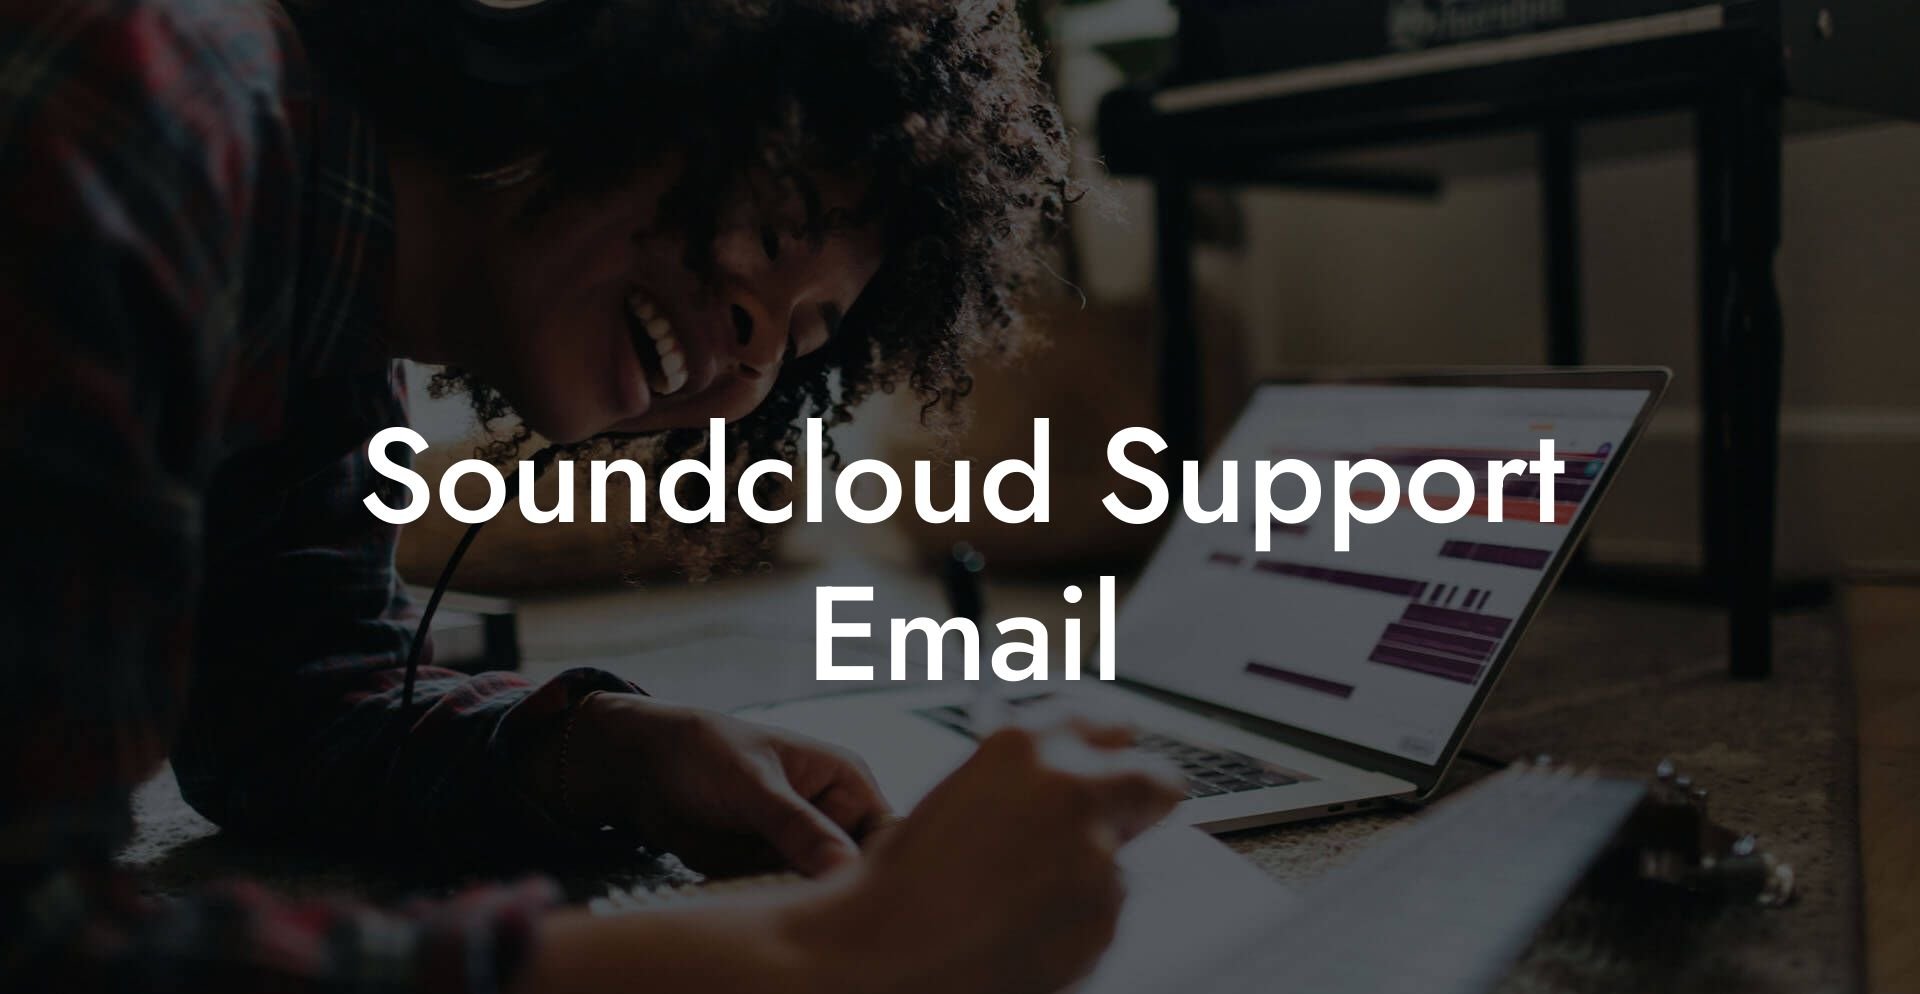 Soundcloud Support Email